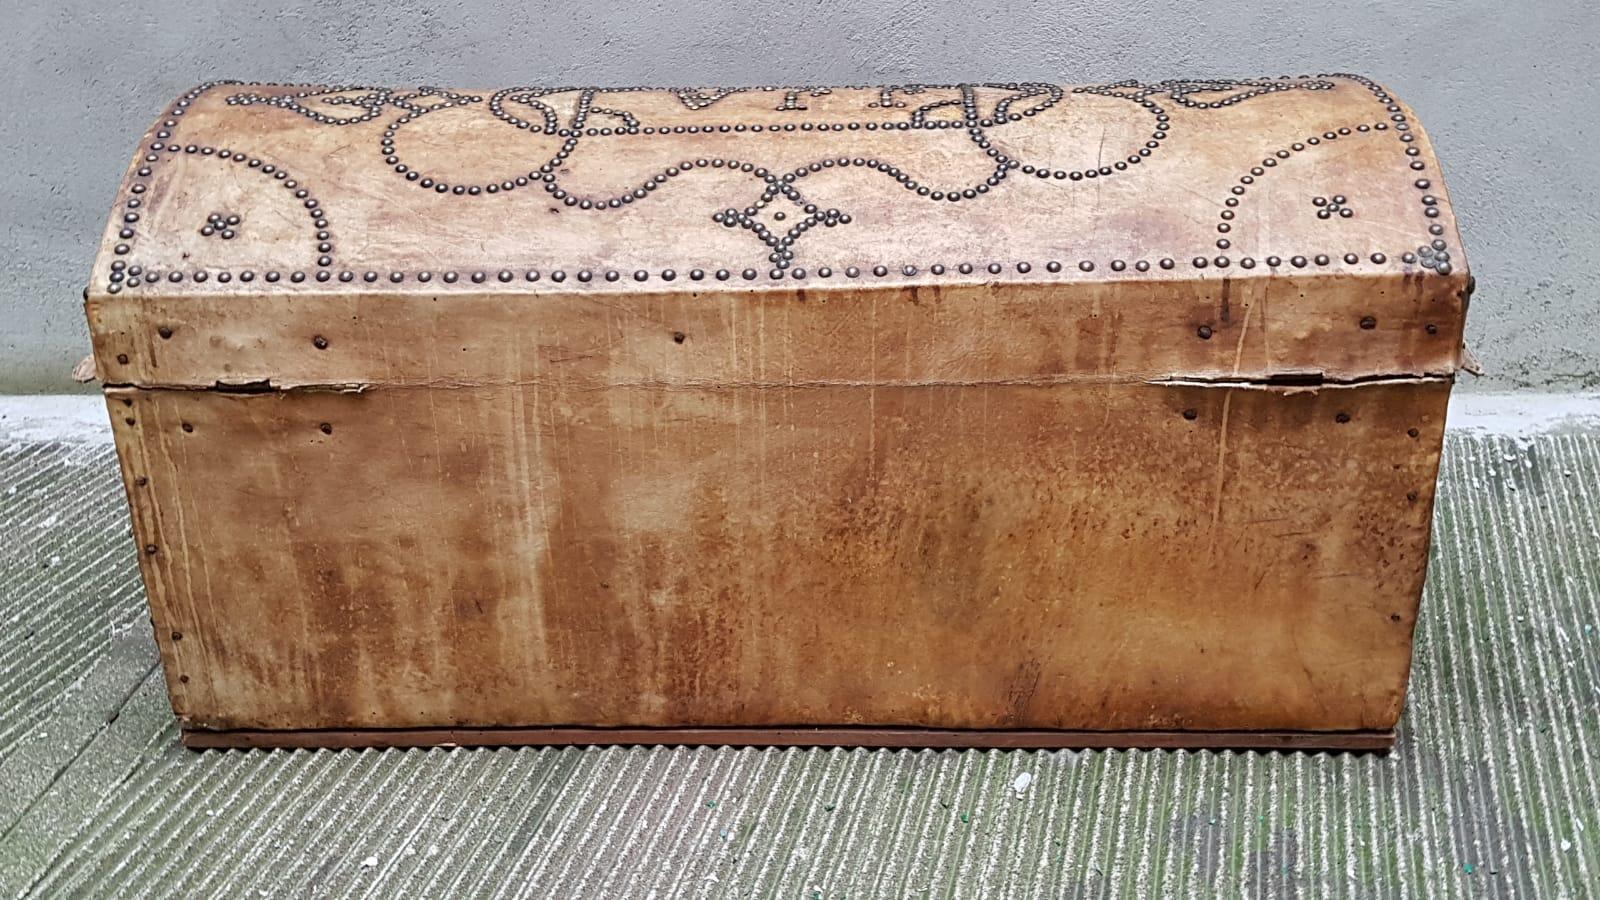 This beautiful and unique trunk comes from Portugal age 1930. It is made by wood and leather and the surface is characterized by upholstery nails which decorates all the trunk and design the initials of the old owner J.J.A. The trunk has some signs